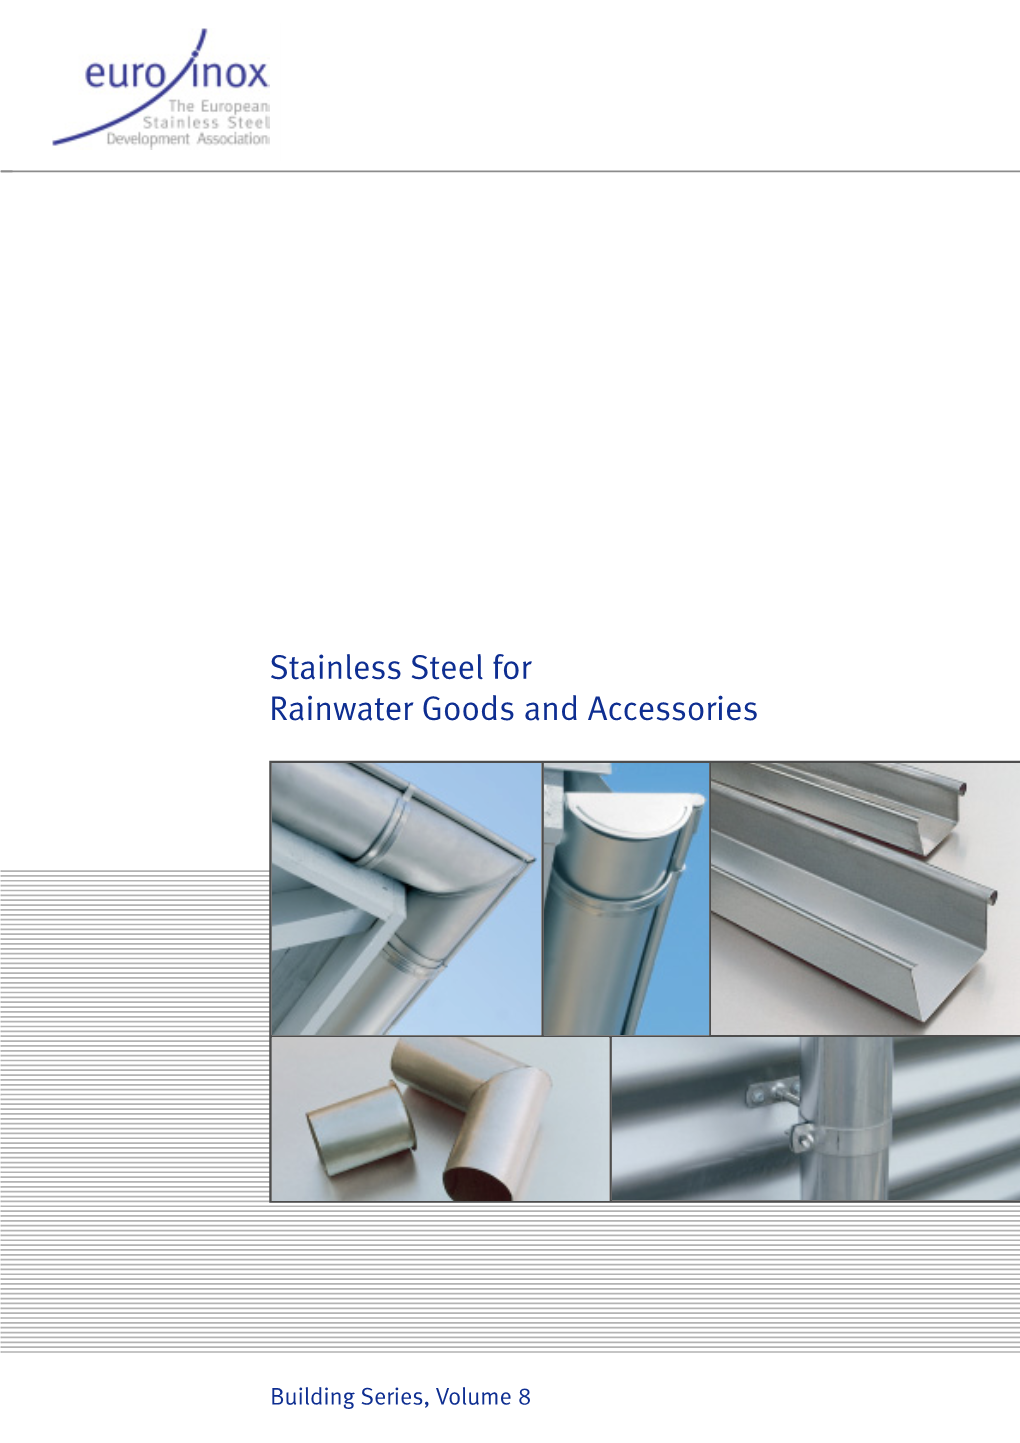 Stainless Steel for Rainwater Goods and Accessories